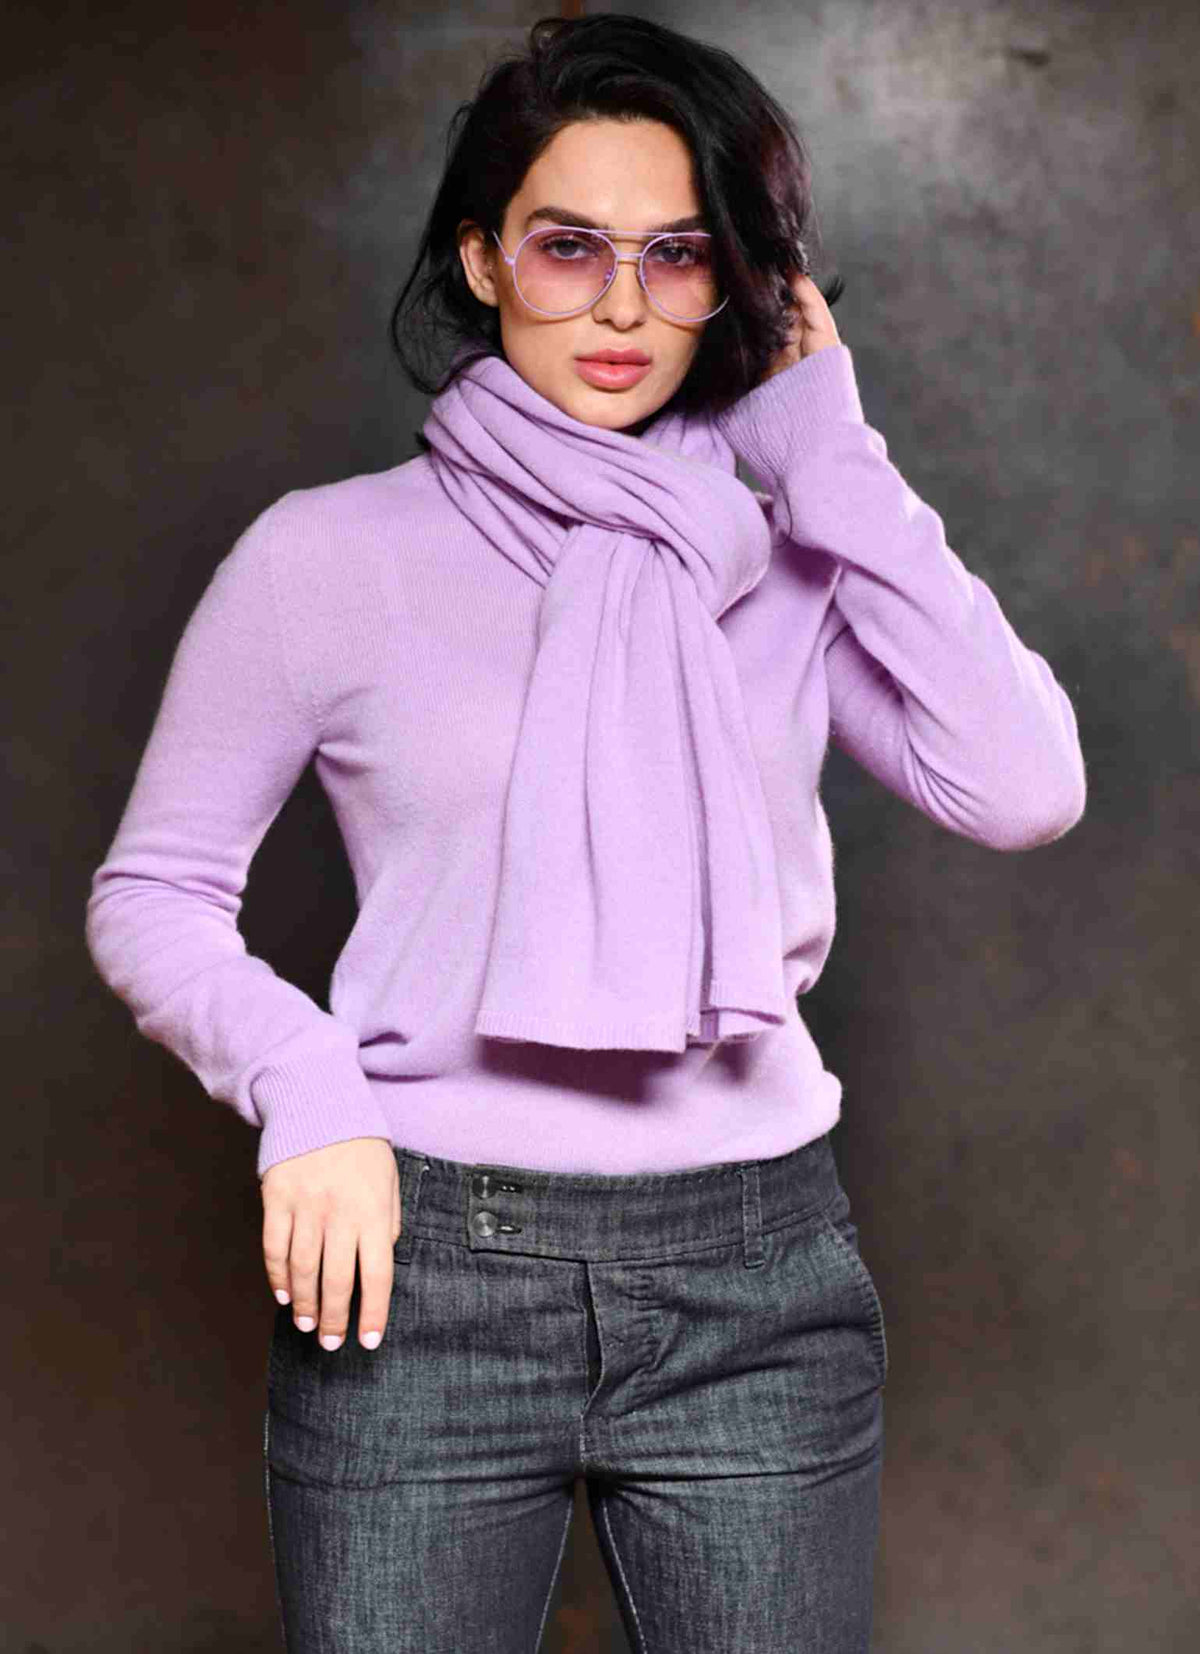 Violet sunglasses worn with violet cashmere sweater and soft scarf 